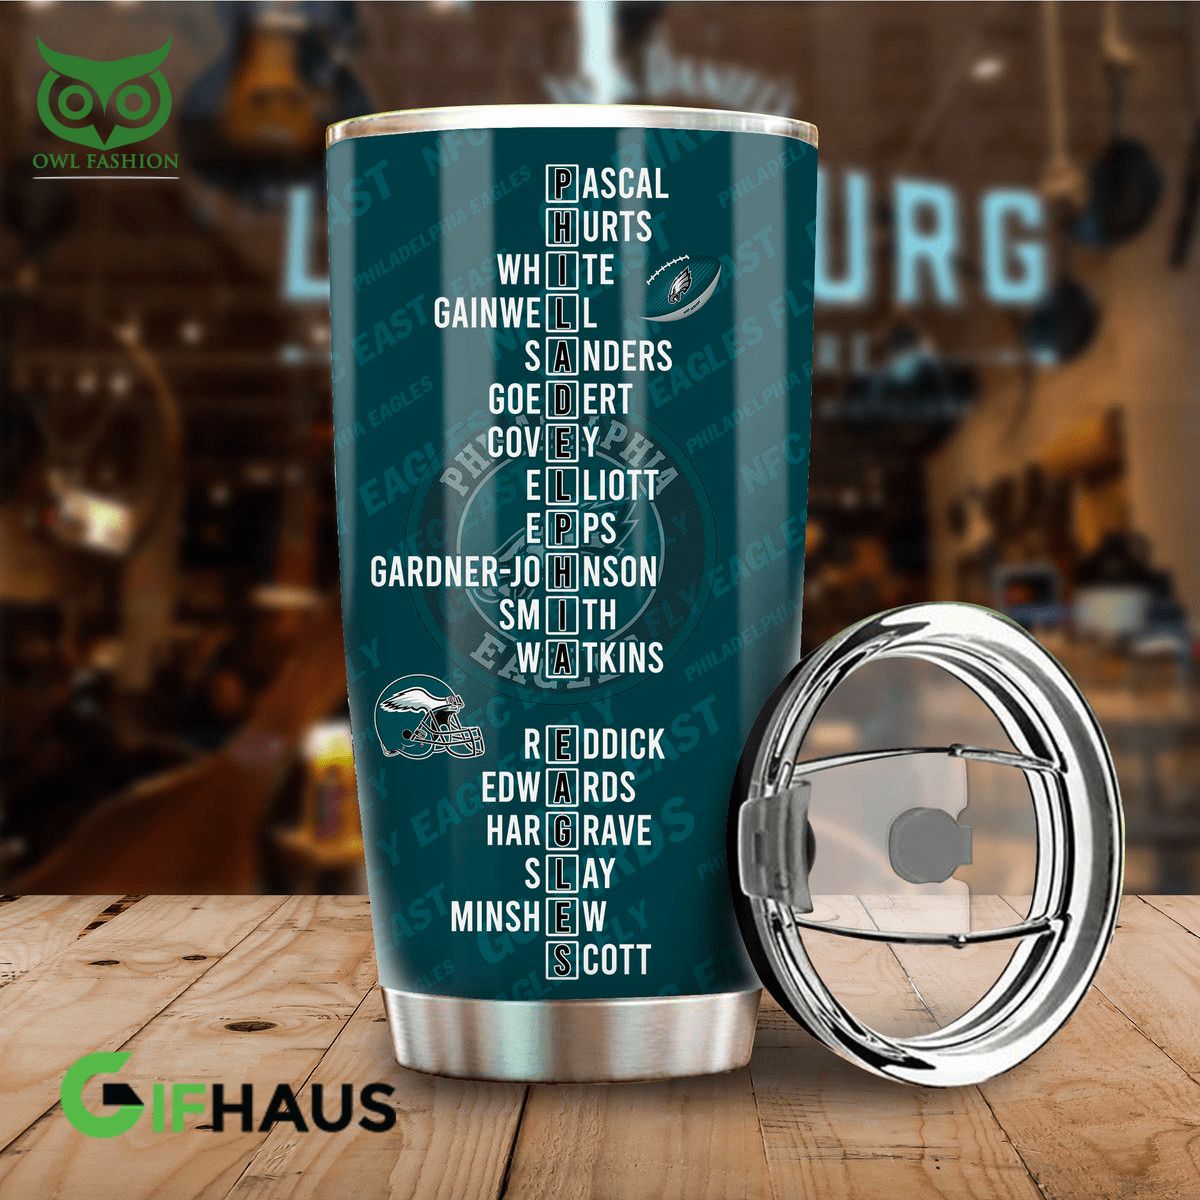 NFL Philadelphia Eagles Personalized Stainless Steel Tumblers